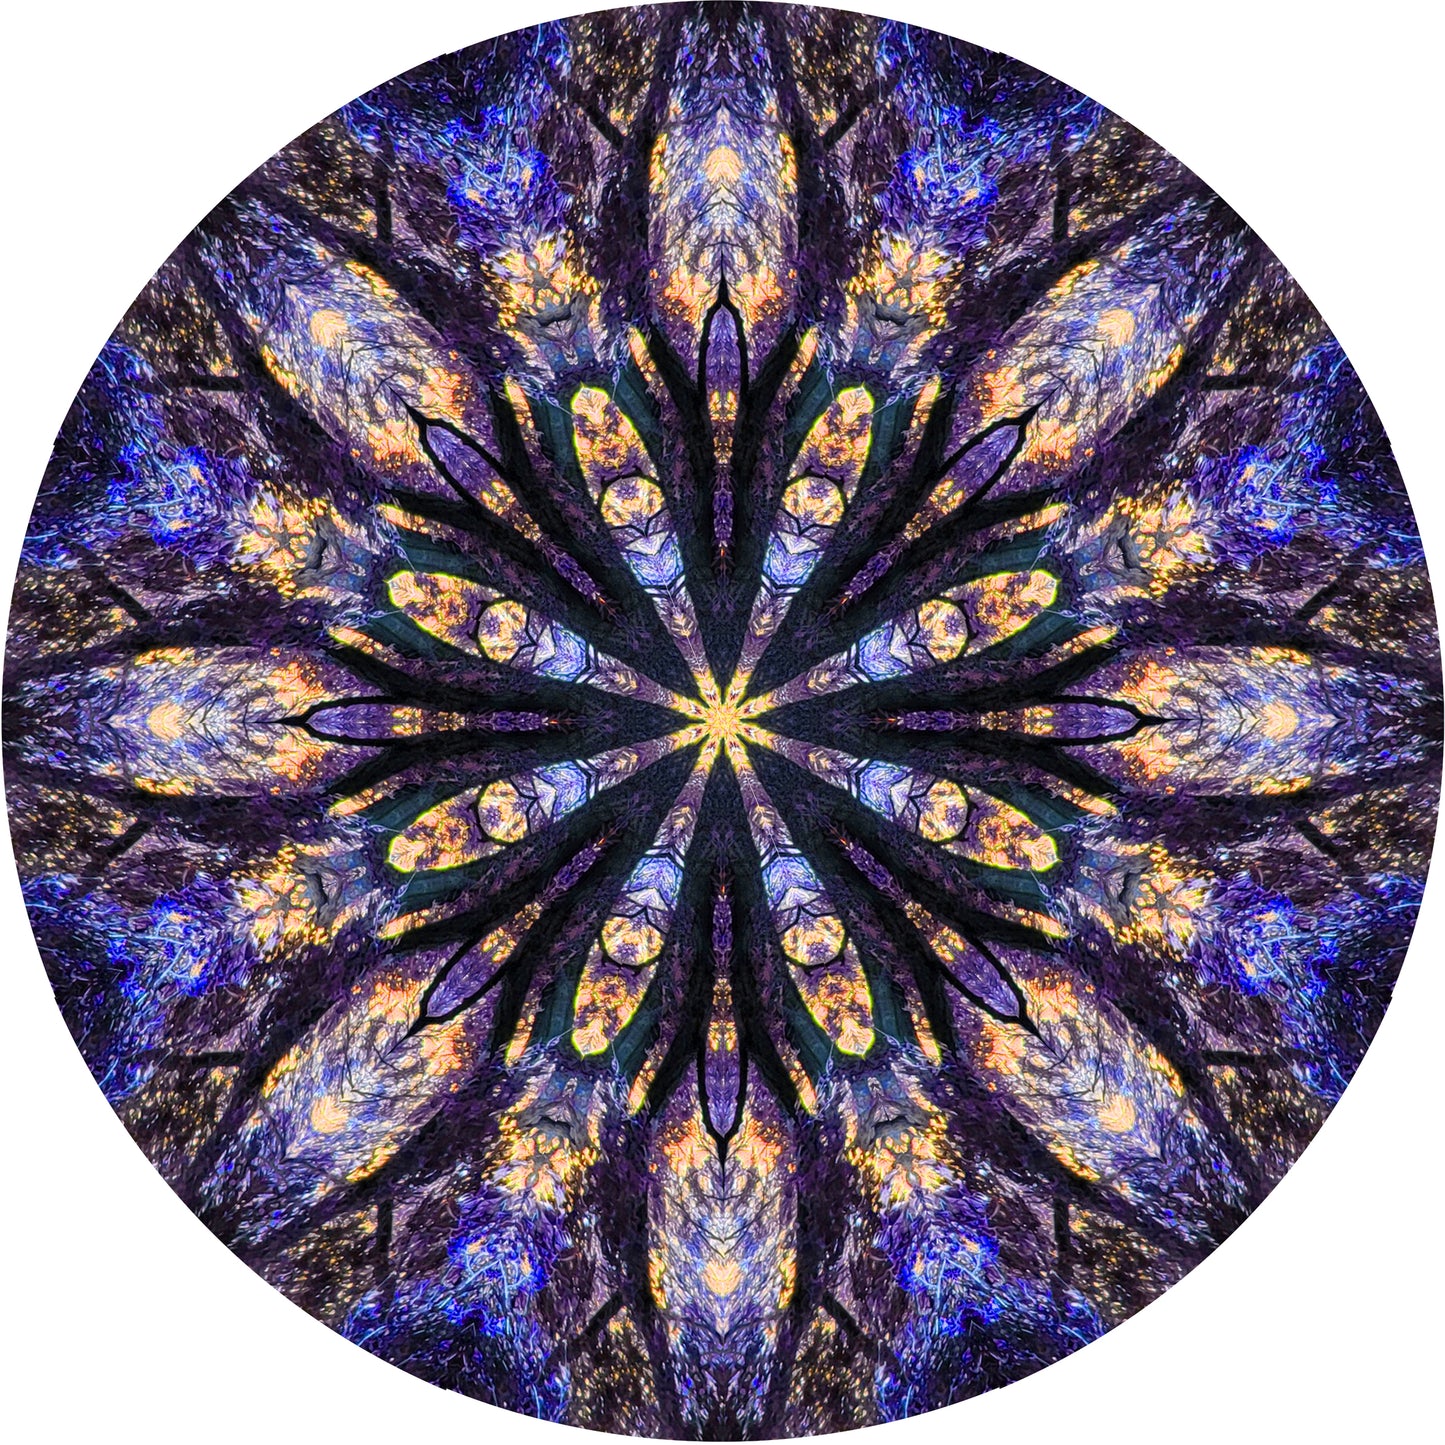 A mandala in bluey purple and pale orange, created from a photo of a tree. there are lots of fascinating details that look like tree sprites in the image